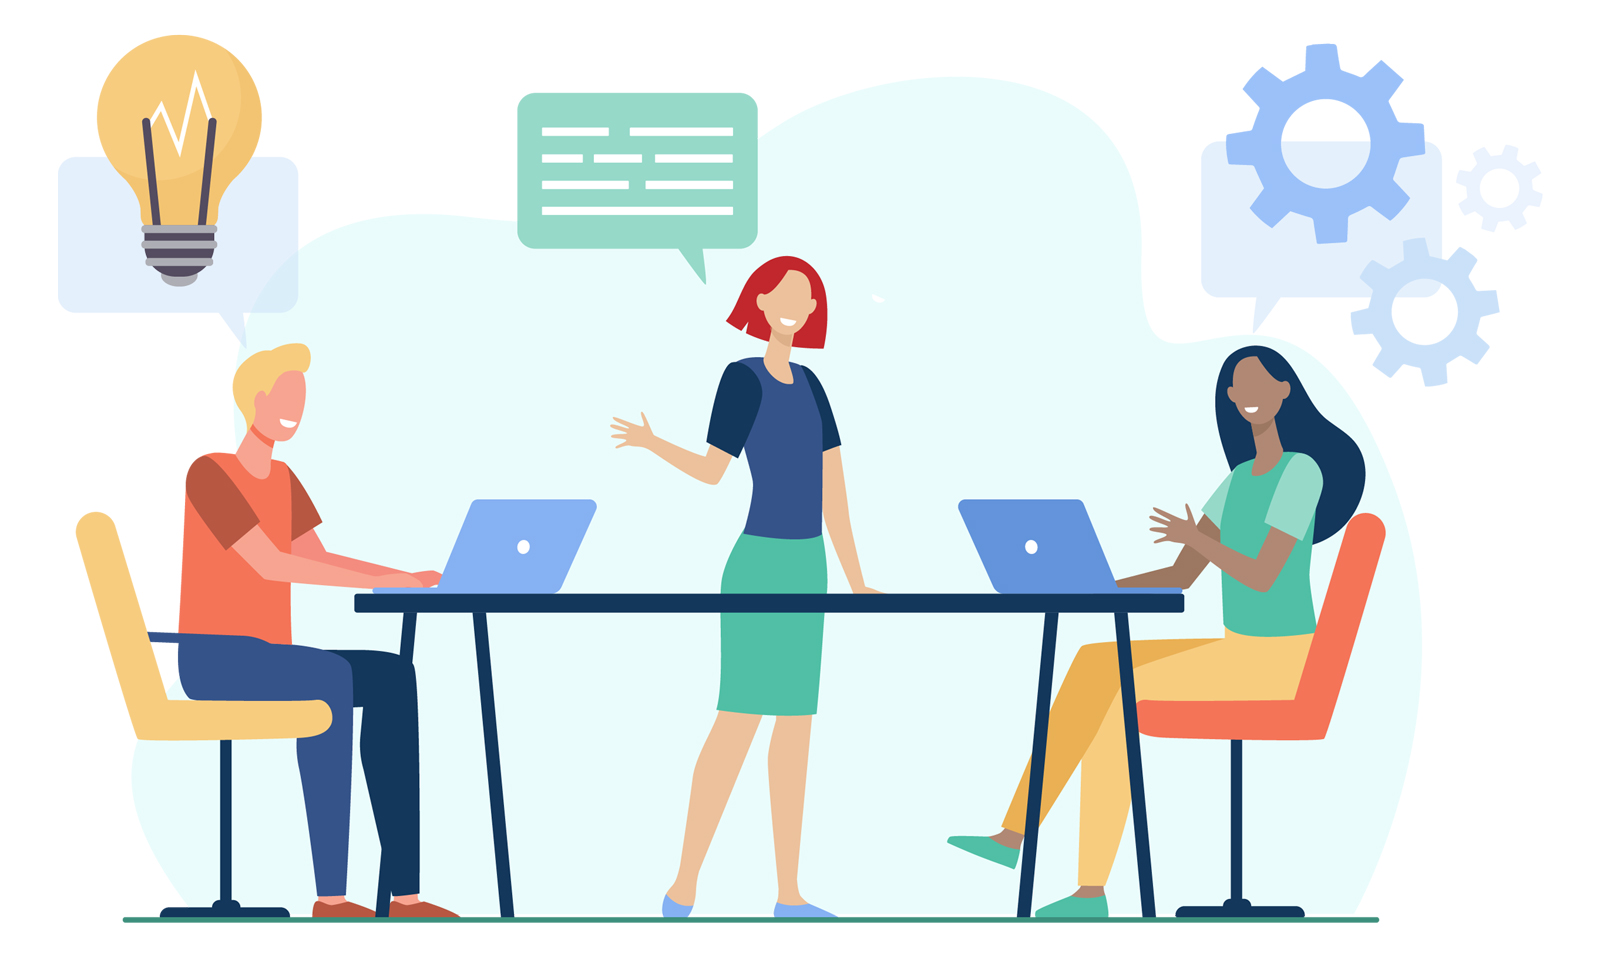 illustration by pch.vector on Freepik of professional female standing and speaking to two colleagues seated at conference table